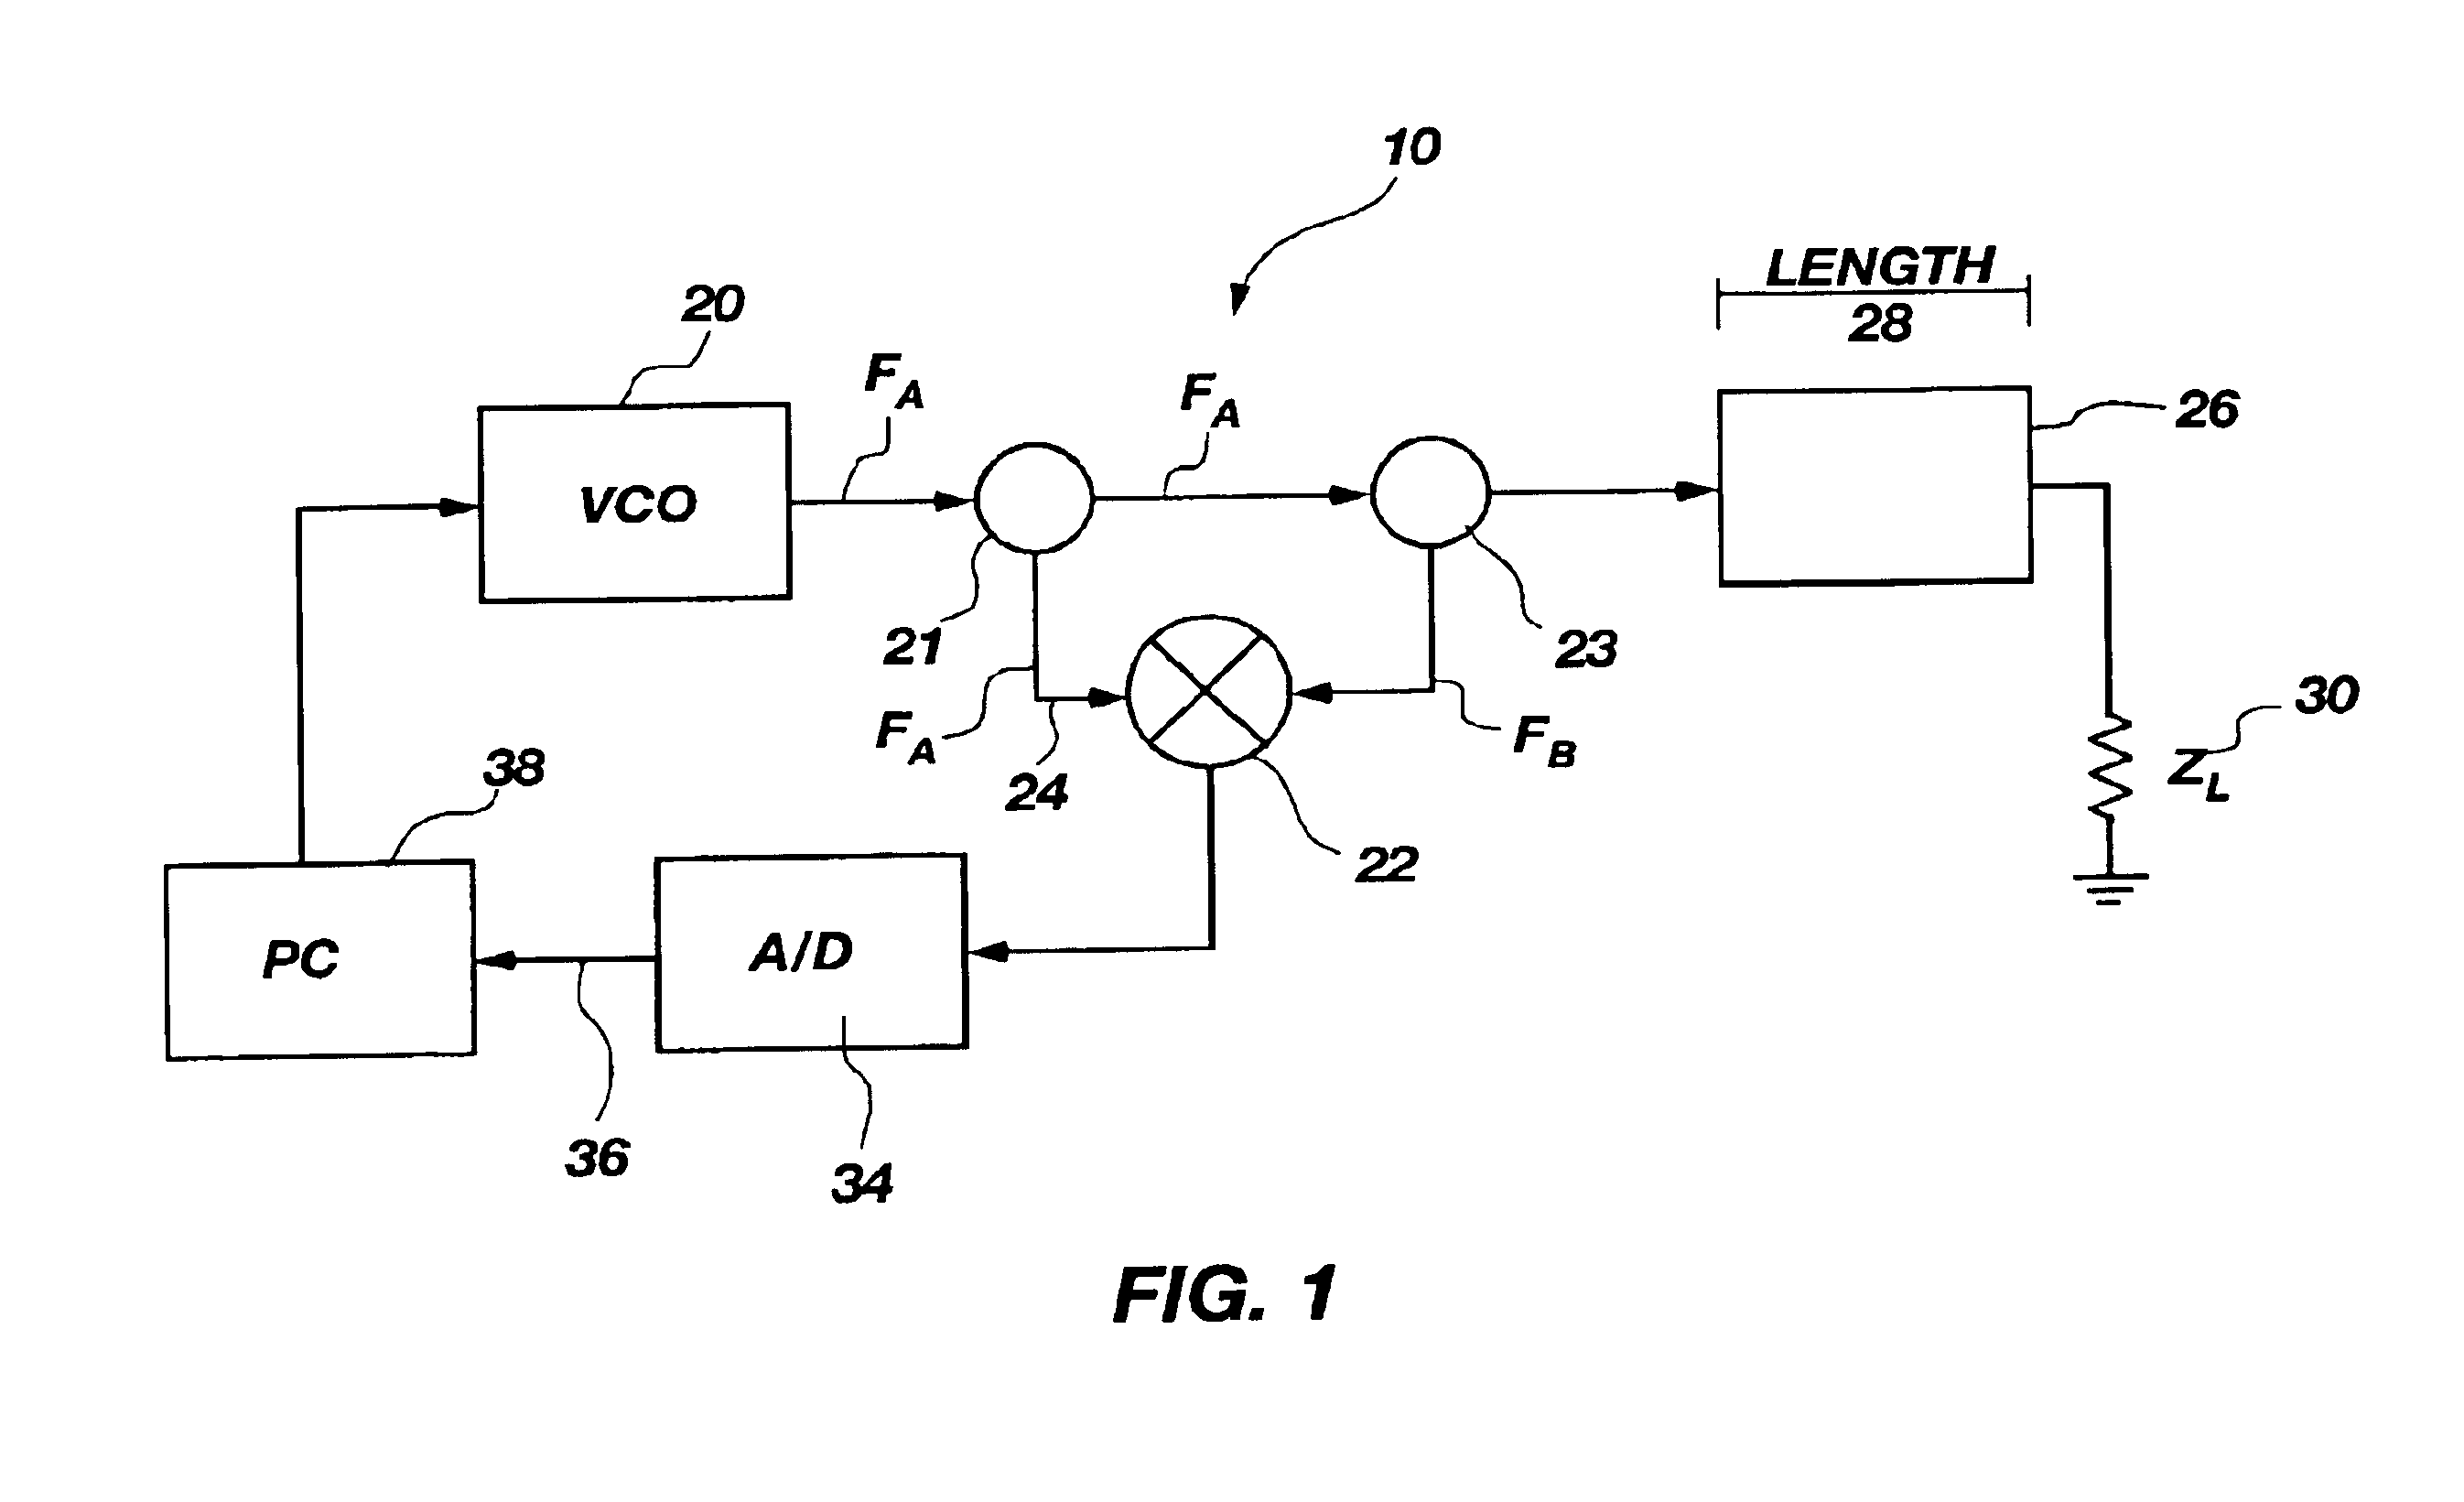 Frequency domain reflectometry system for testing wires and cables utilizing in-situ connectors, passive connectivity, cable fray detection, and live wire testing